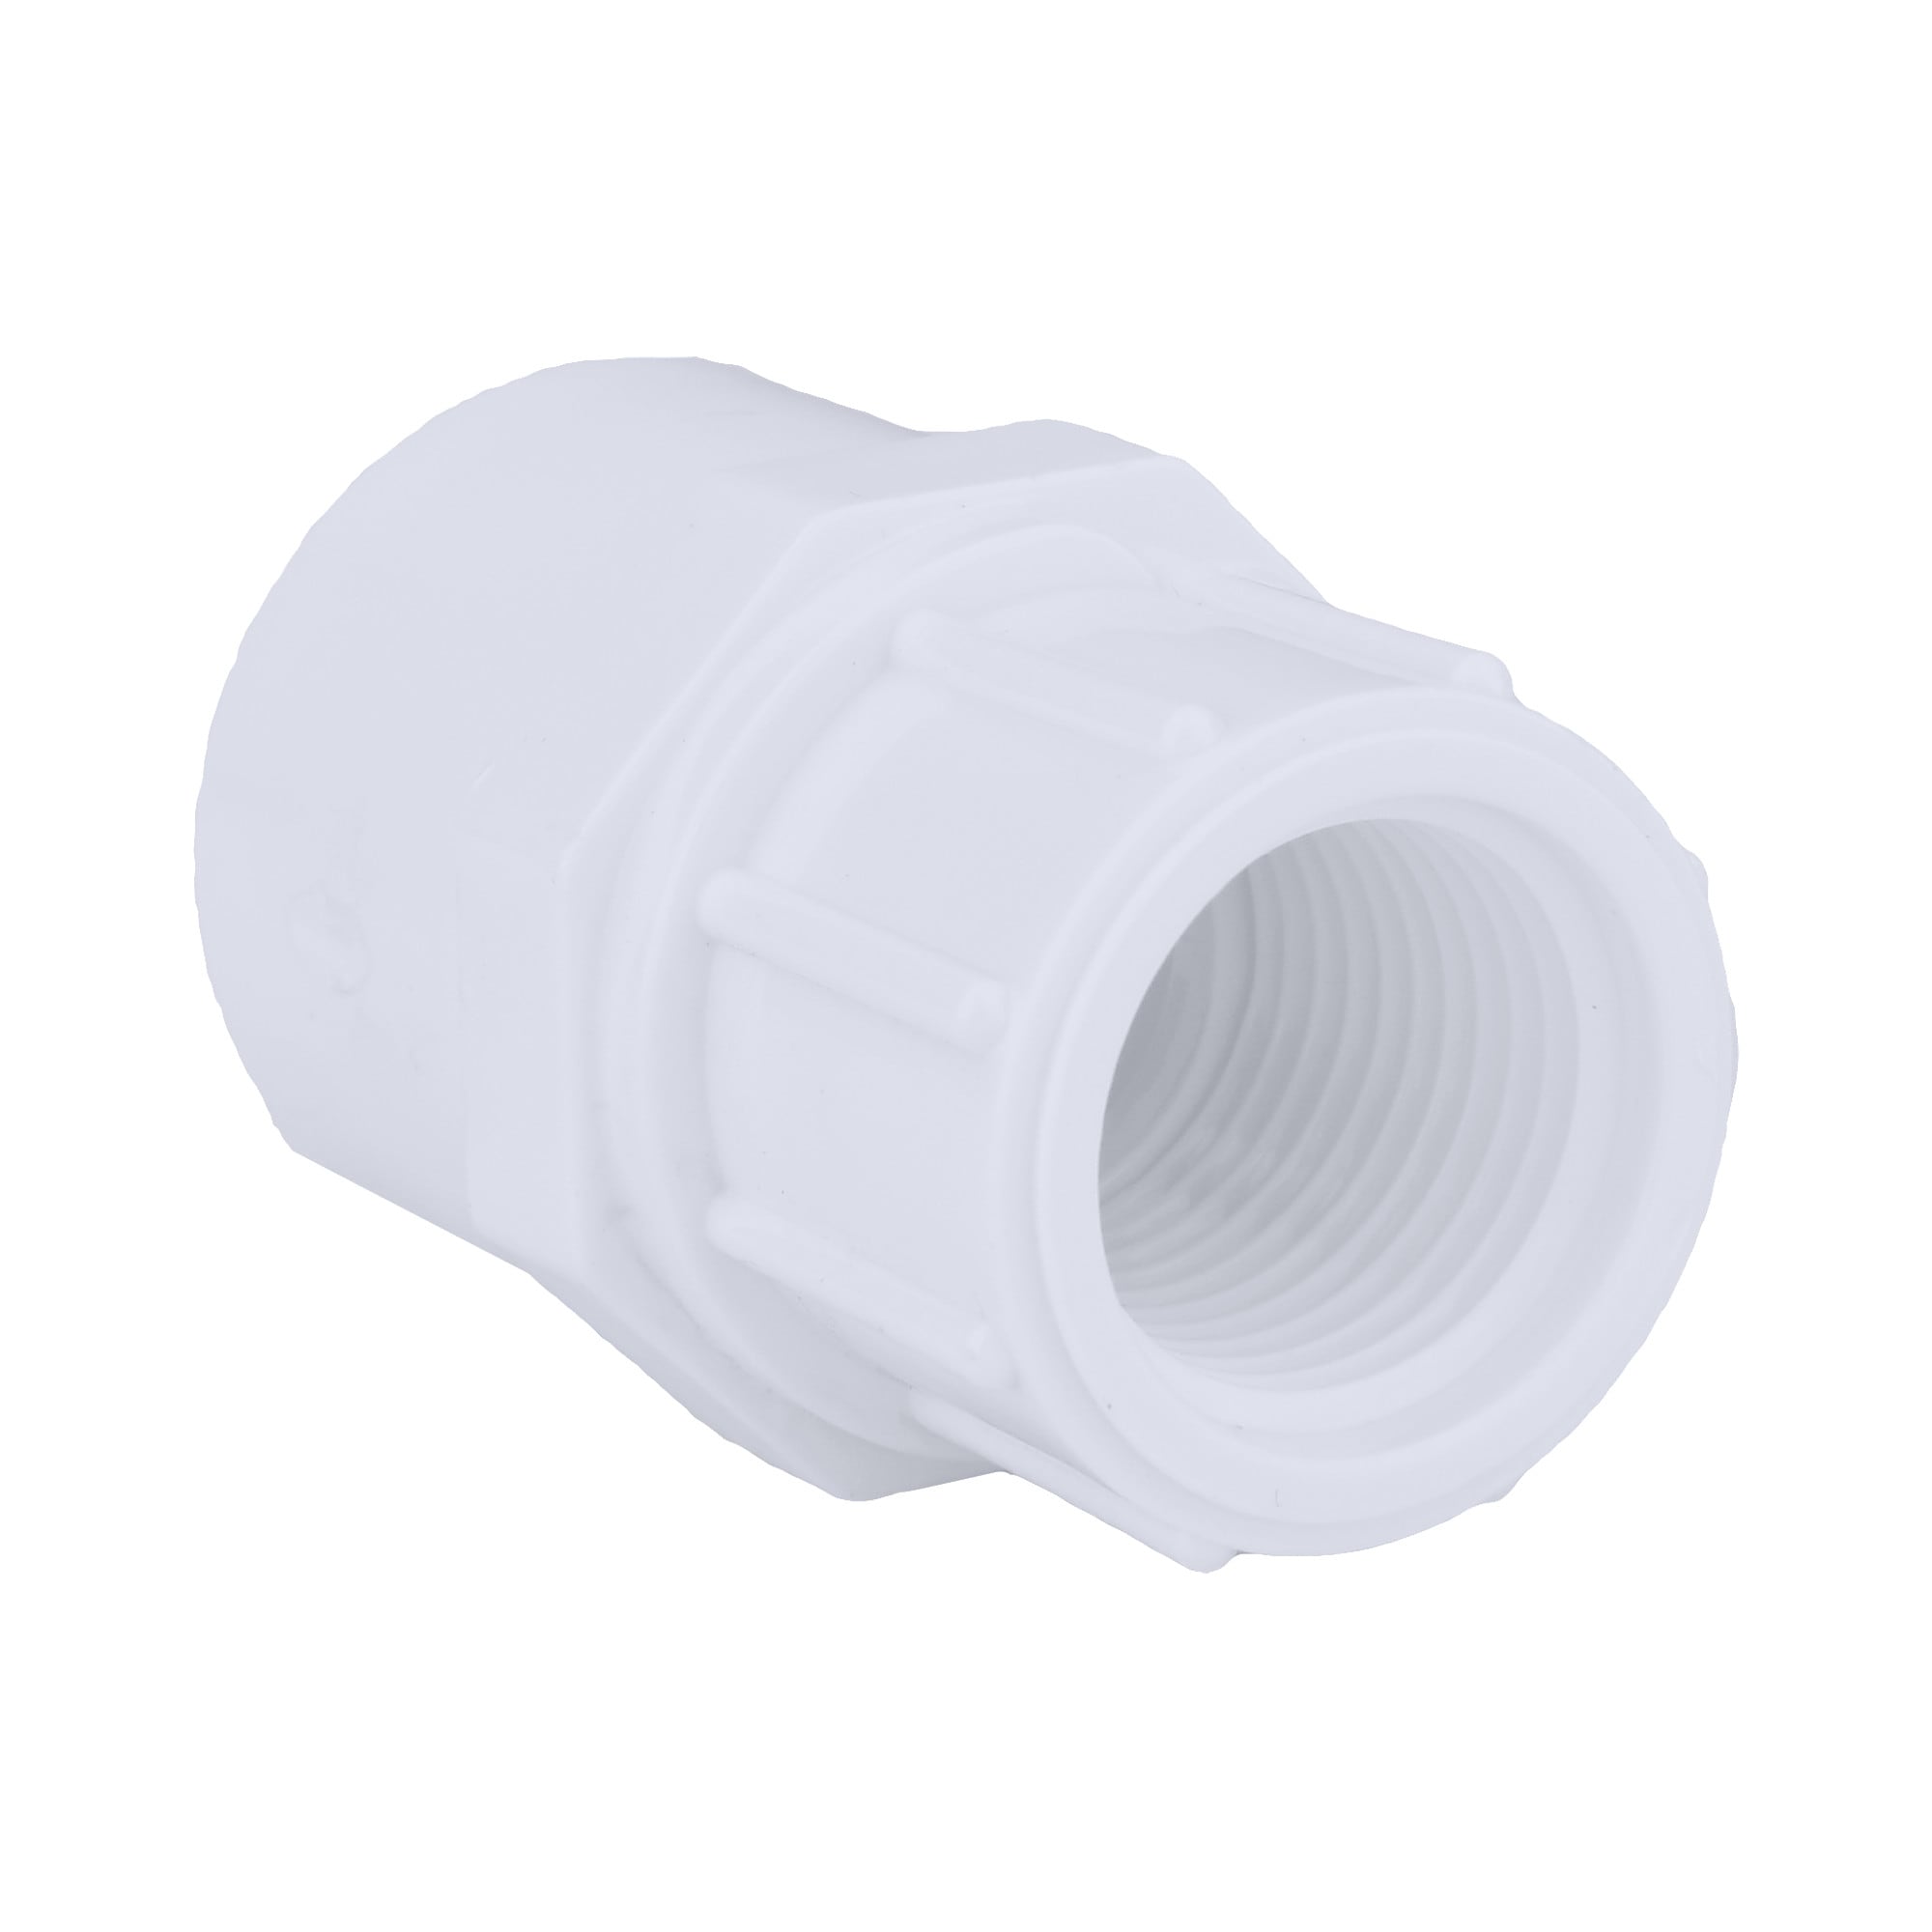 Quick Connect White Union Tee Adapter for 1/4 Water Lines or Tubing